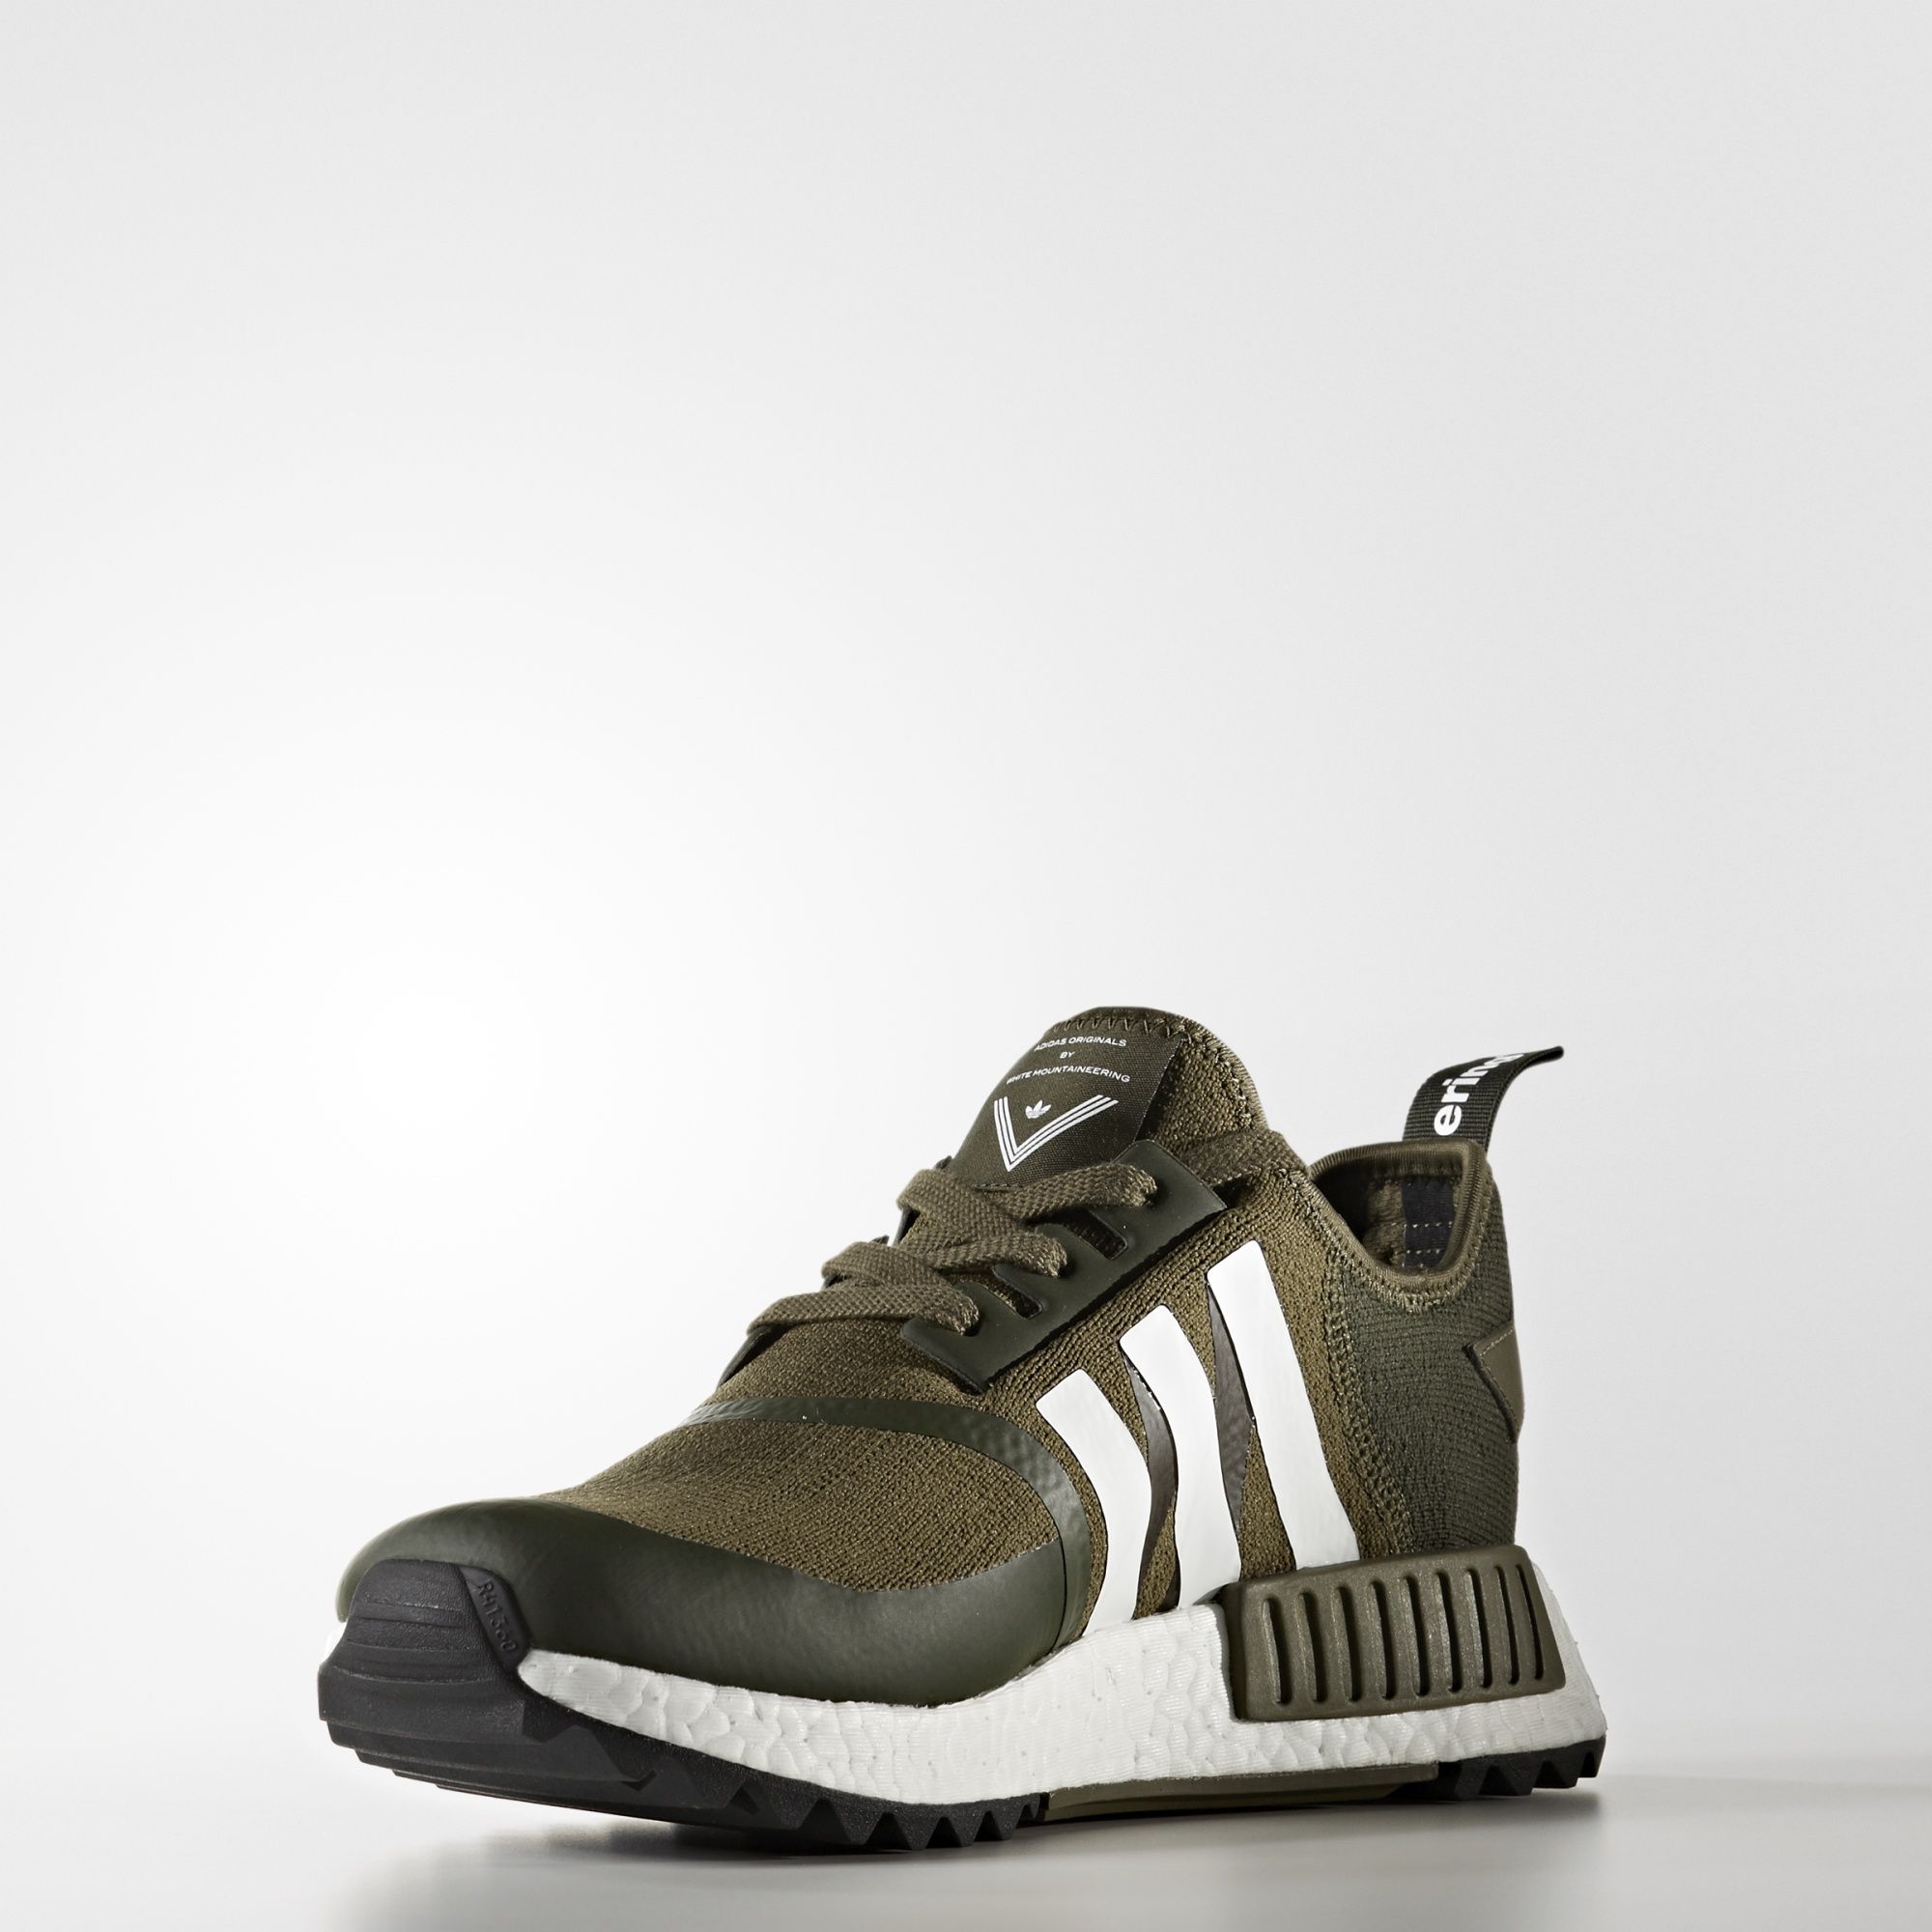 adidas-nmd_r1-trail-pk-x-white-mountaineering-trace-olive-3